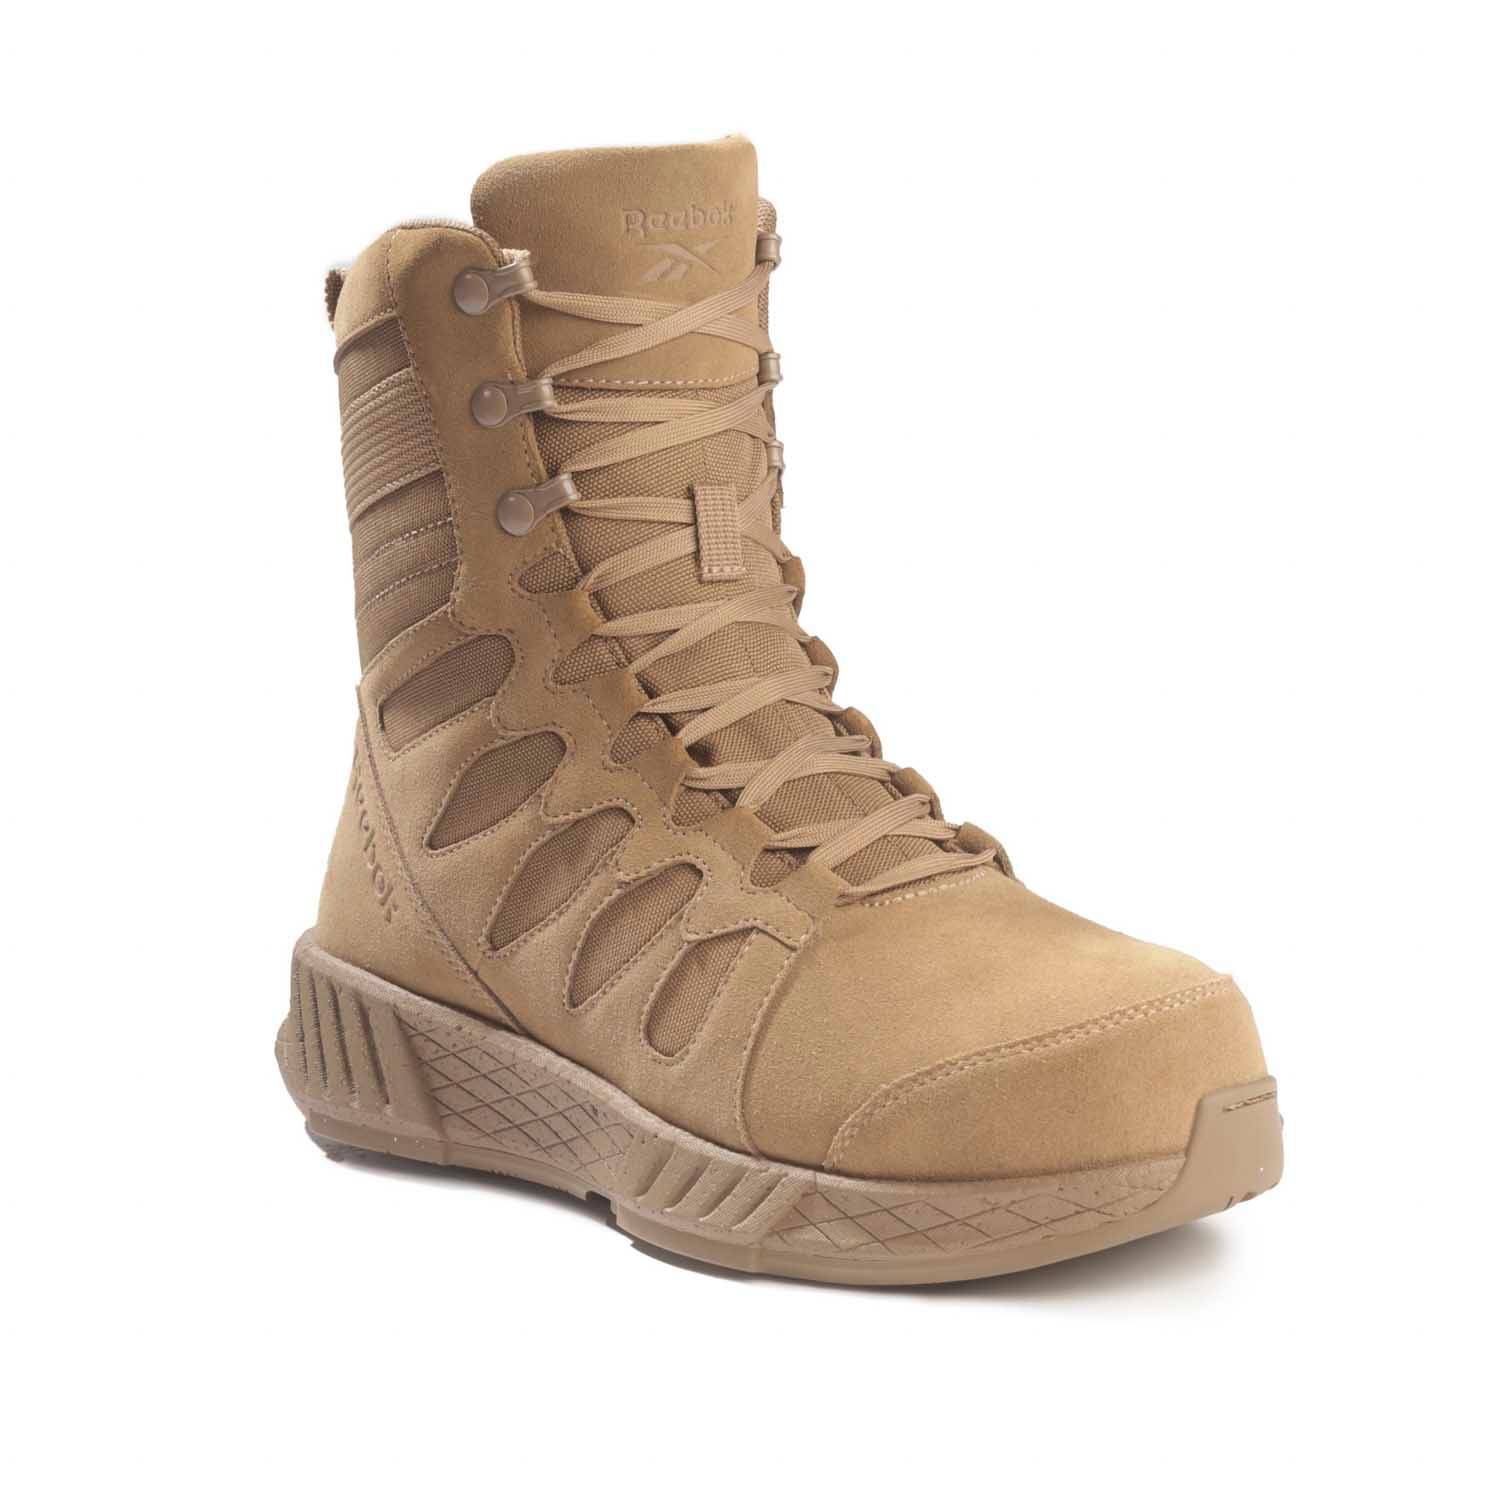 Reebok Floatride Energy 8" Tactical Boot w/ Side Zip & Compo